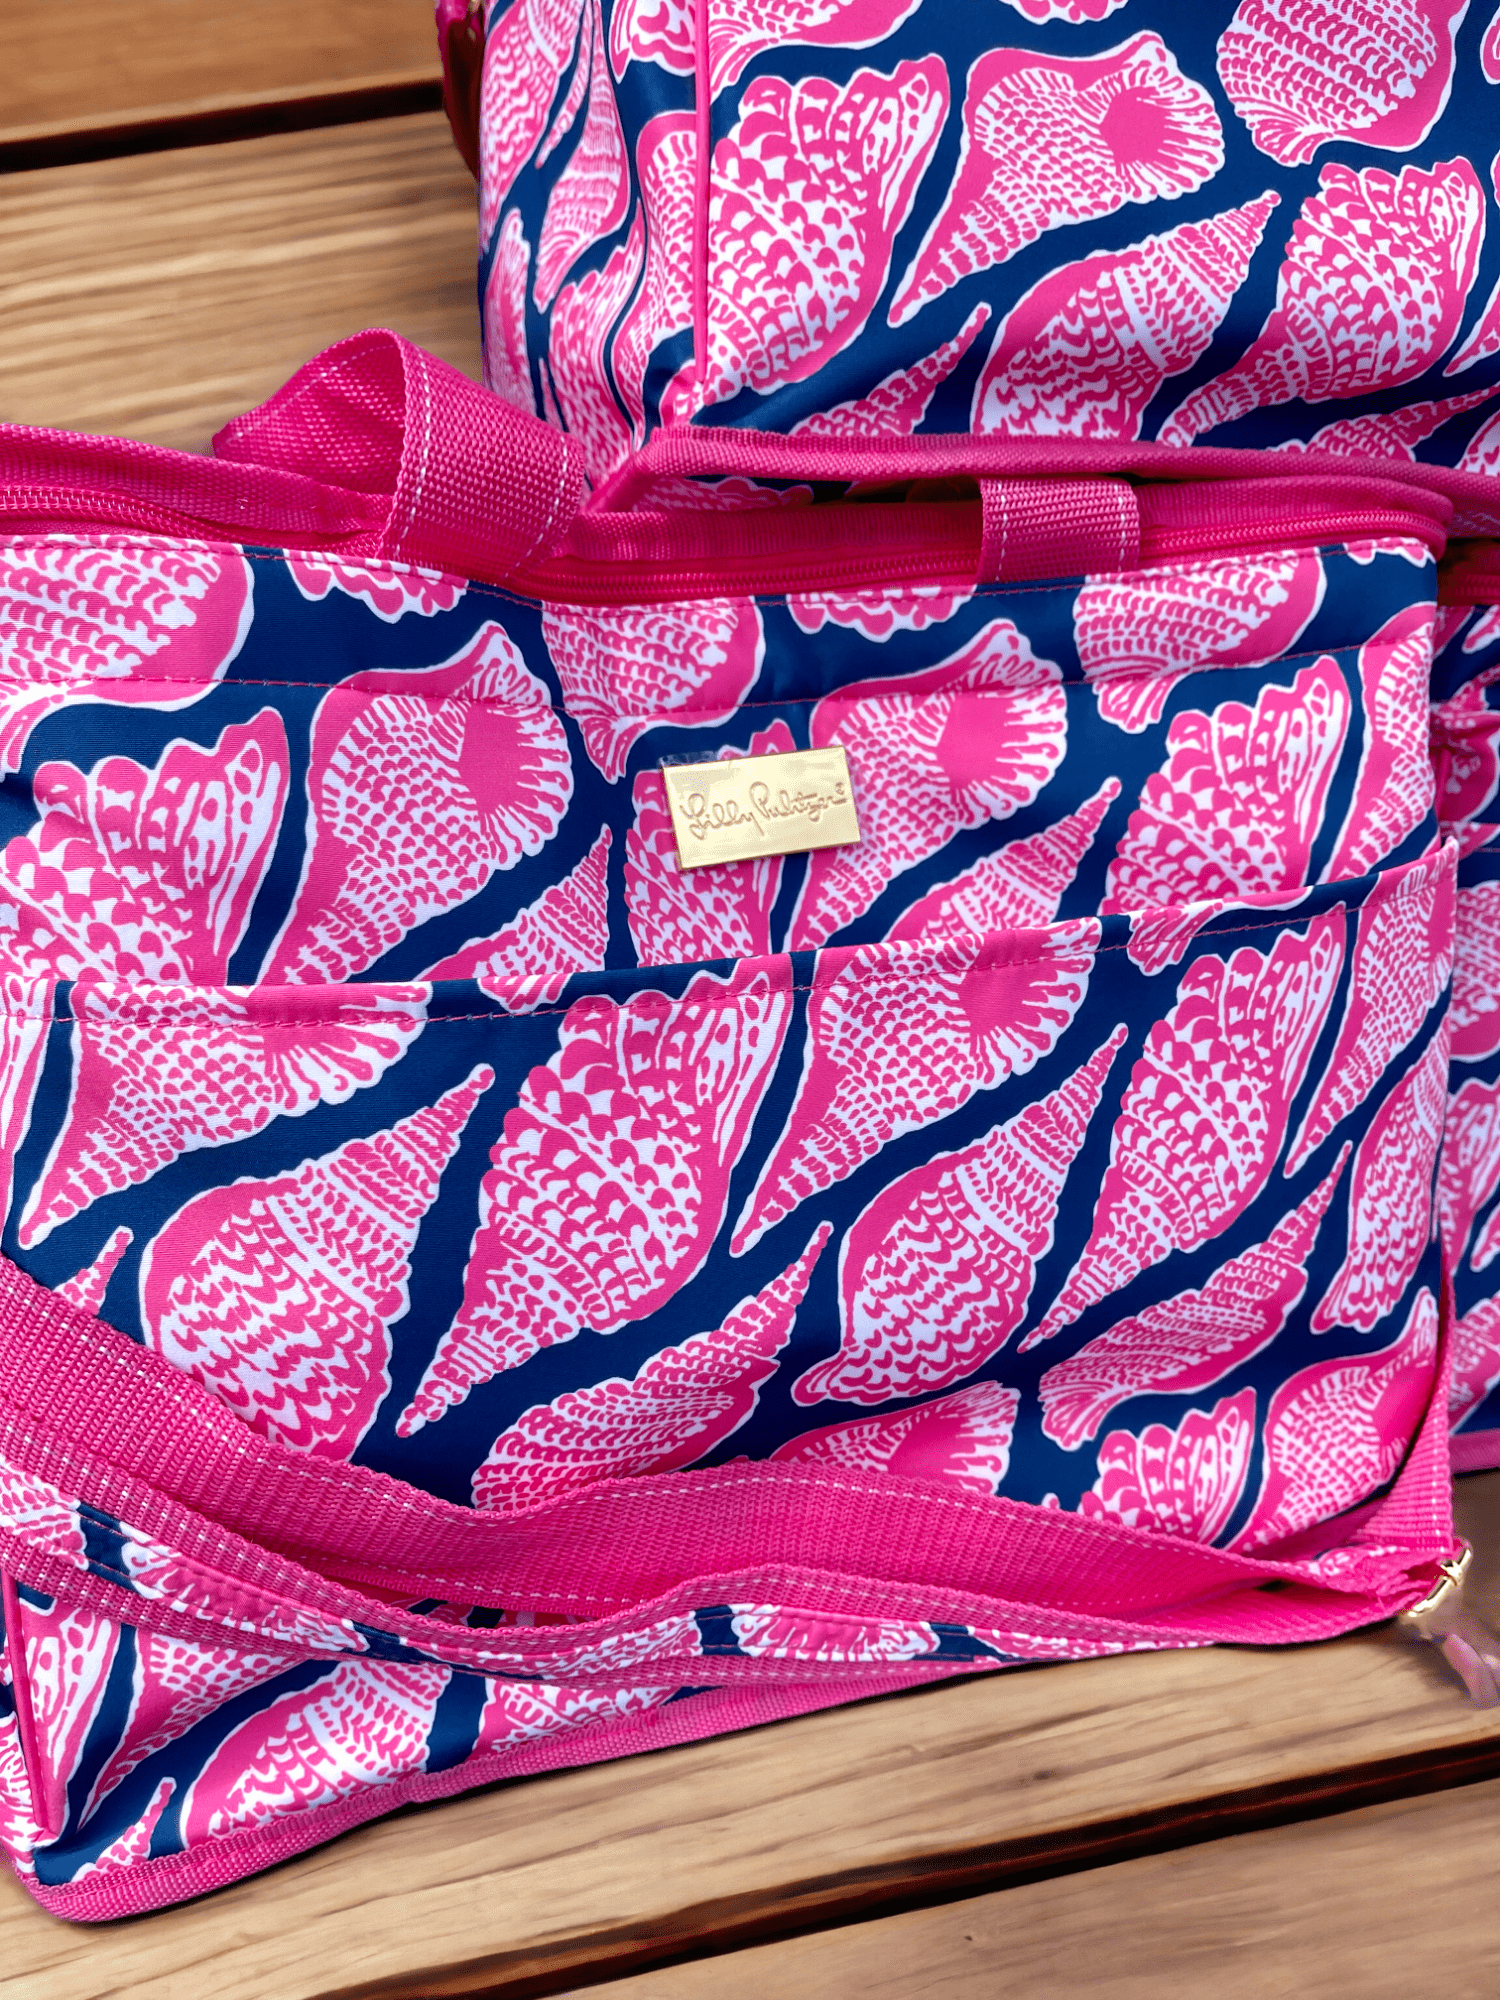 Lilly Pulitzer Beach Cooler “Cute As A Shell” Pink Navy Print - Pretty Crafty Lady Shop